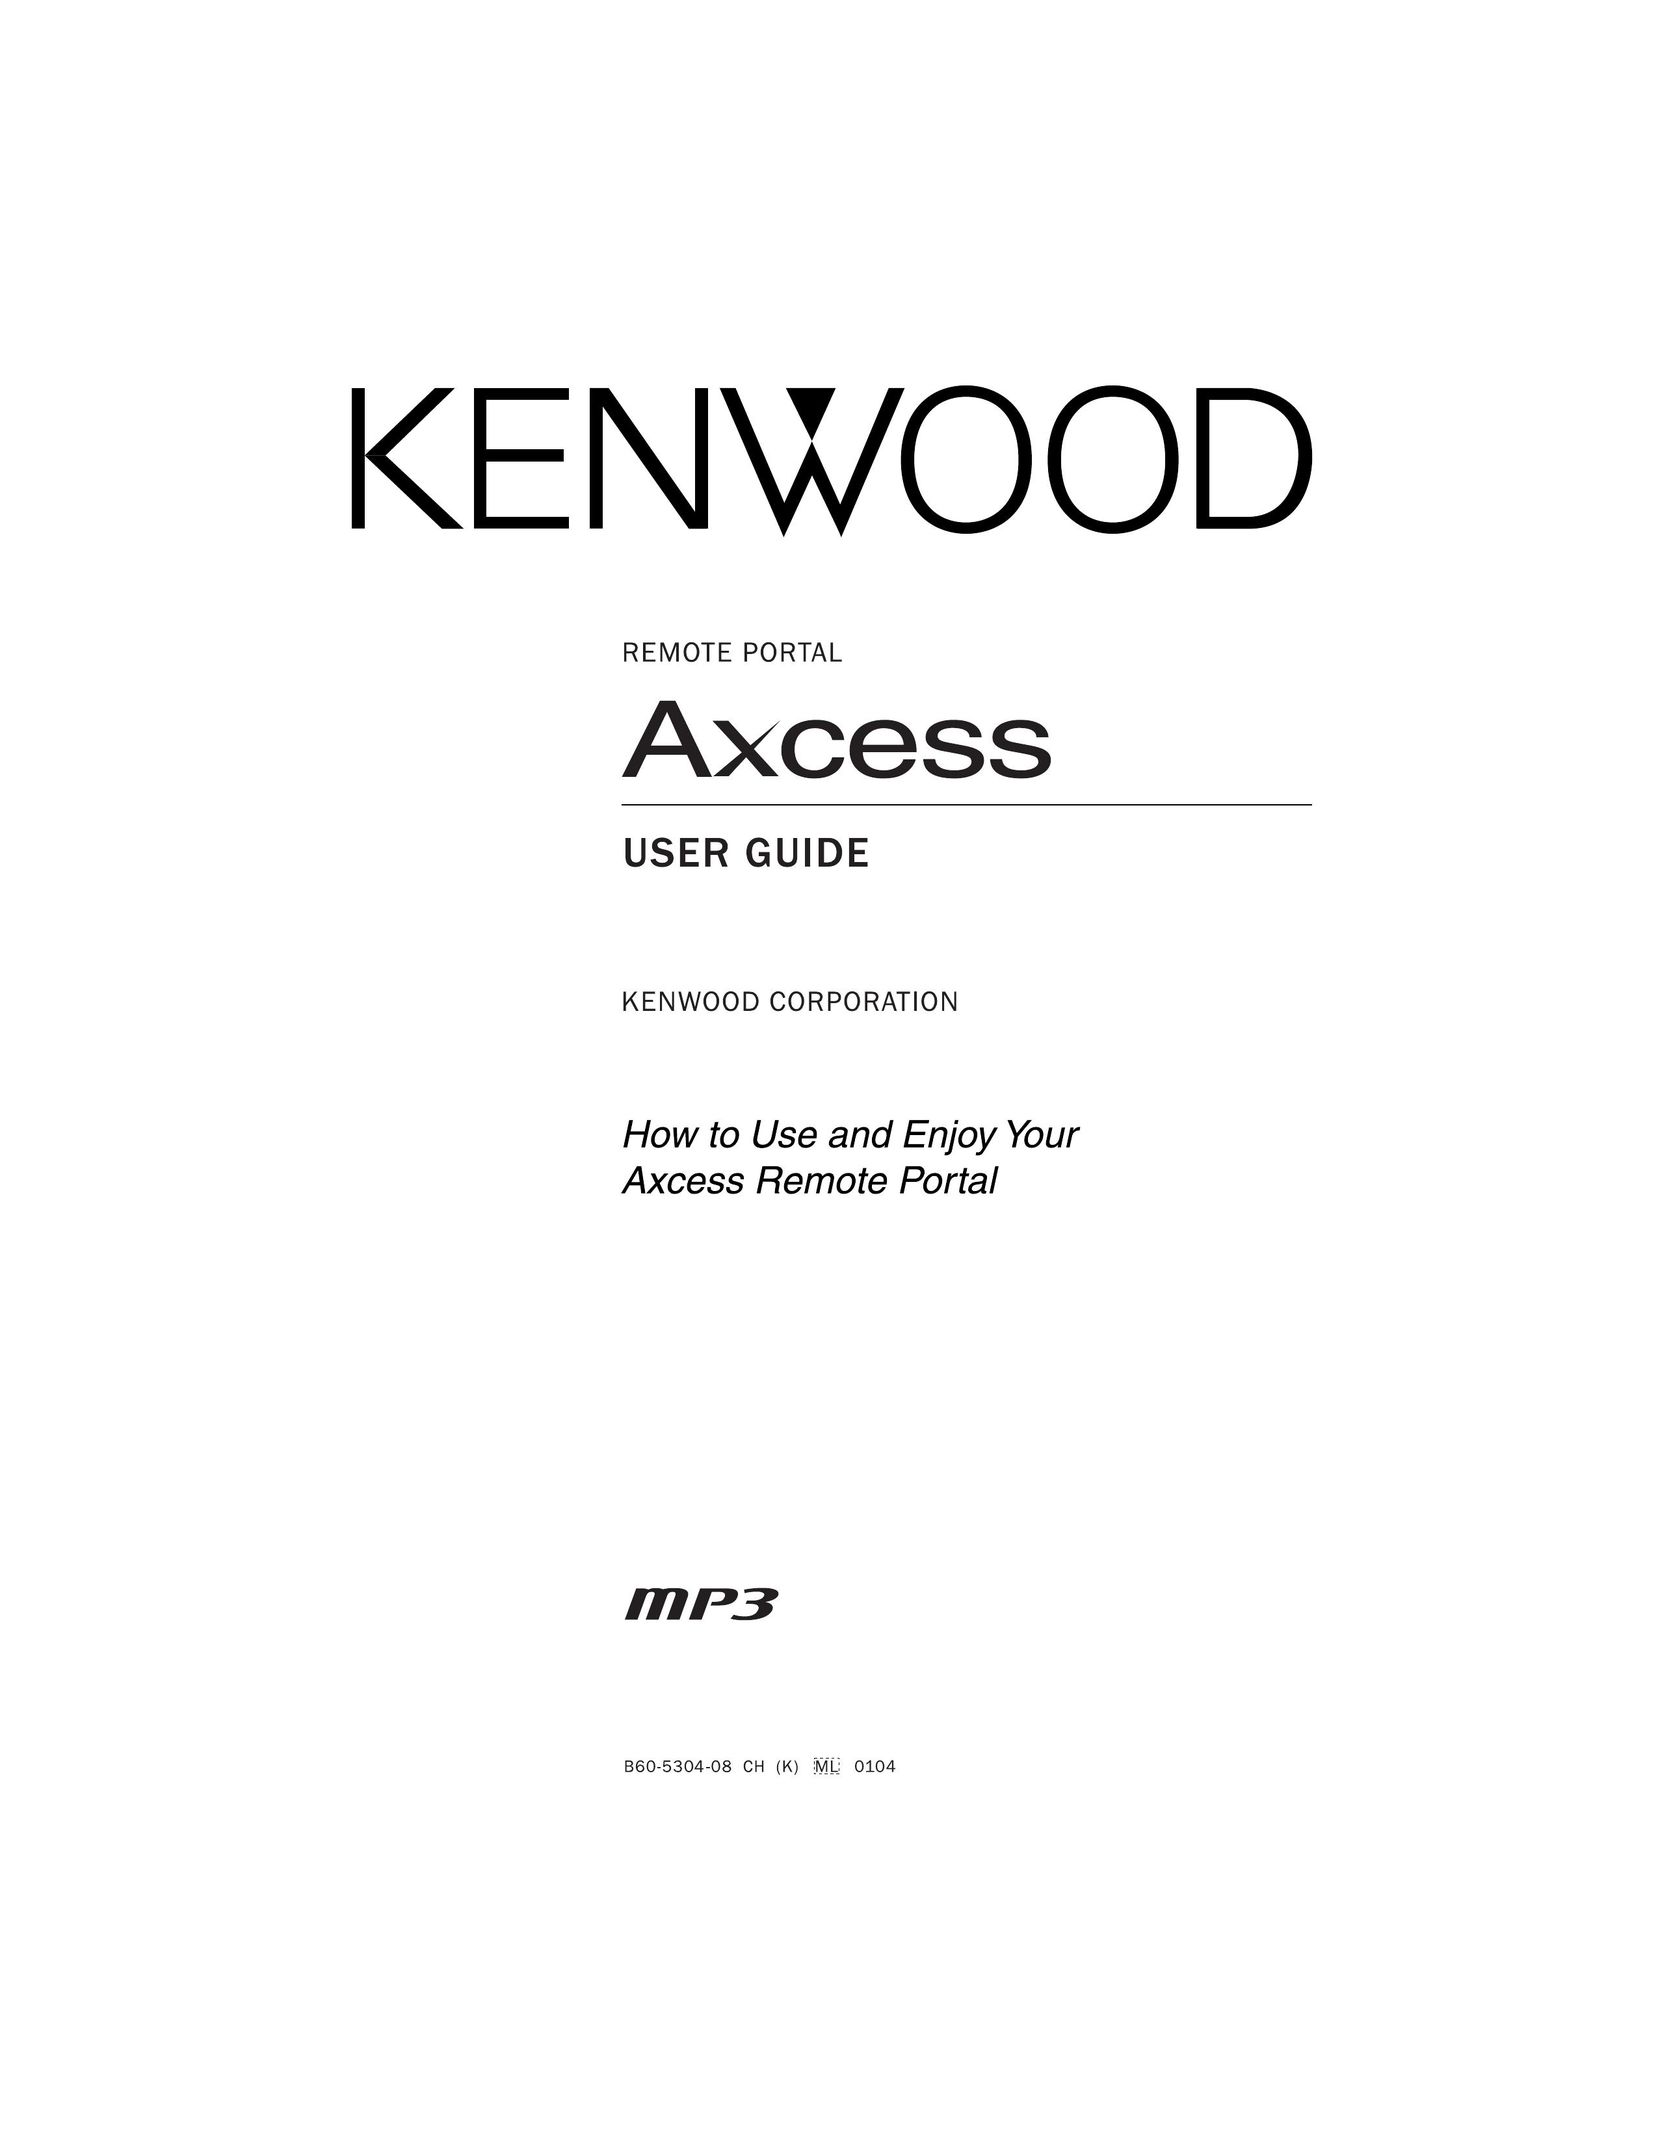 Kenwood Axcess Remote Portal Universal Remote User Manual